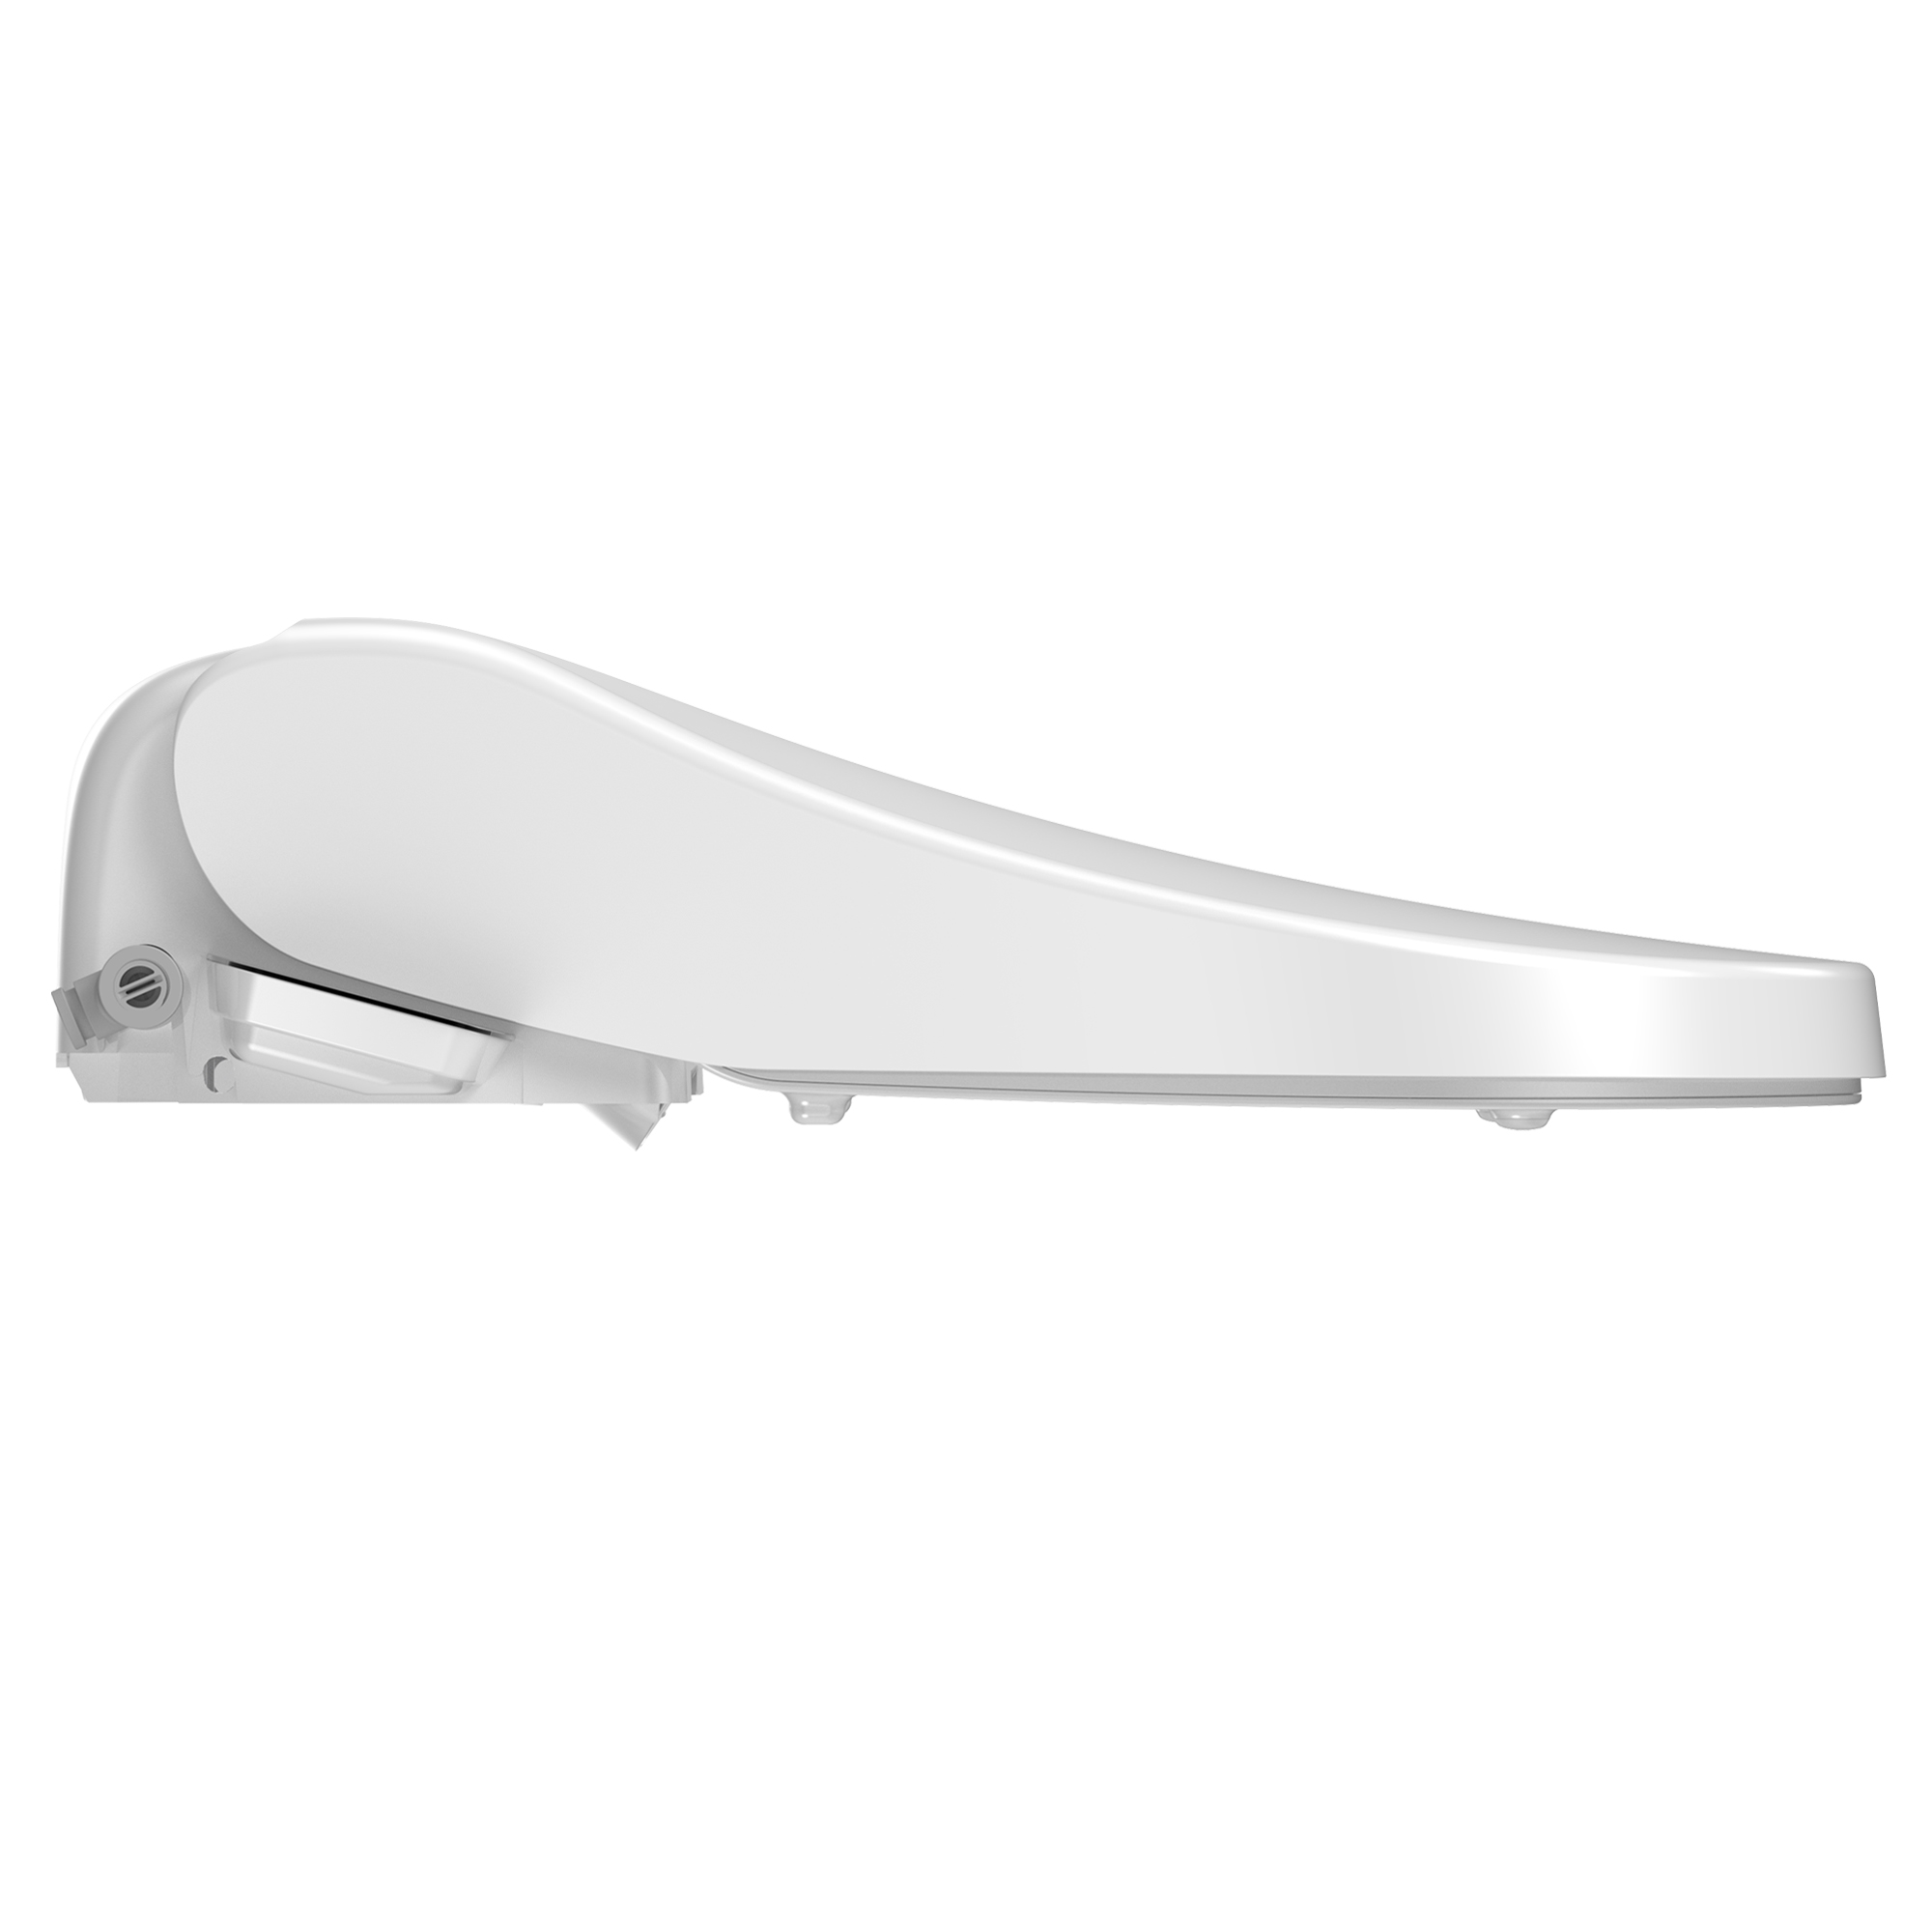 Advanced Clean™ 2.5 Electric SpaLet™ Bidet Seat With Remote Operation